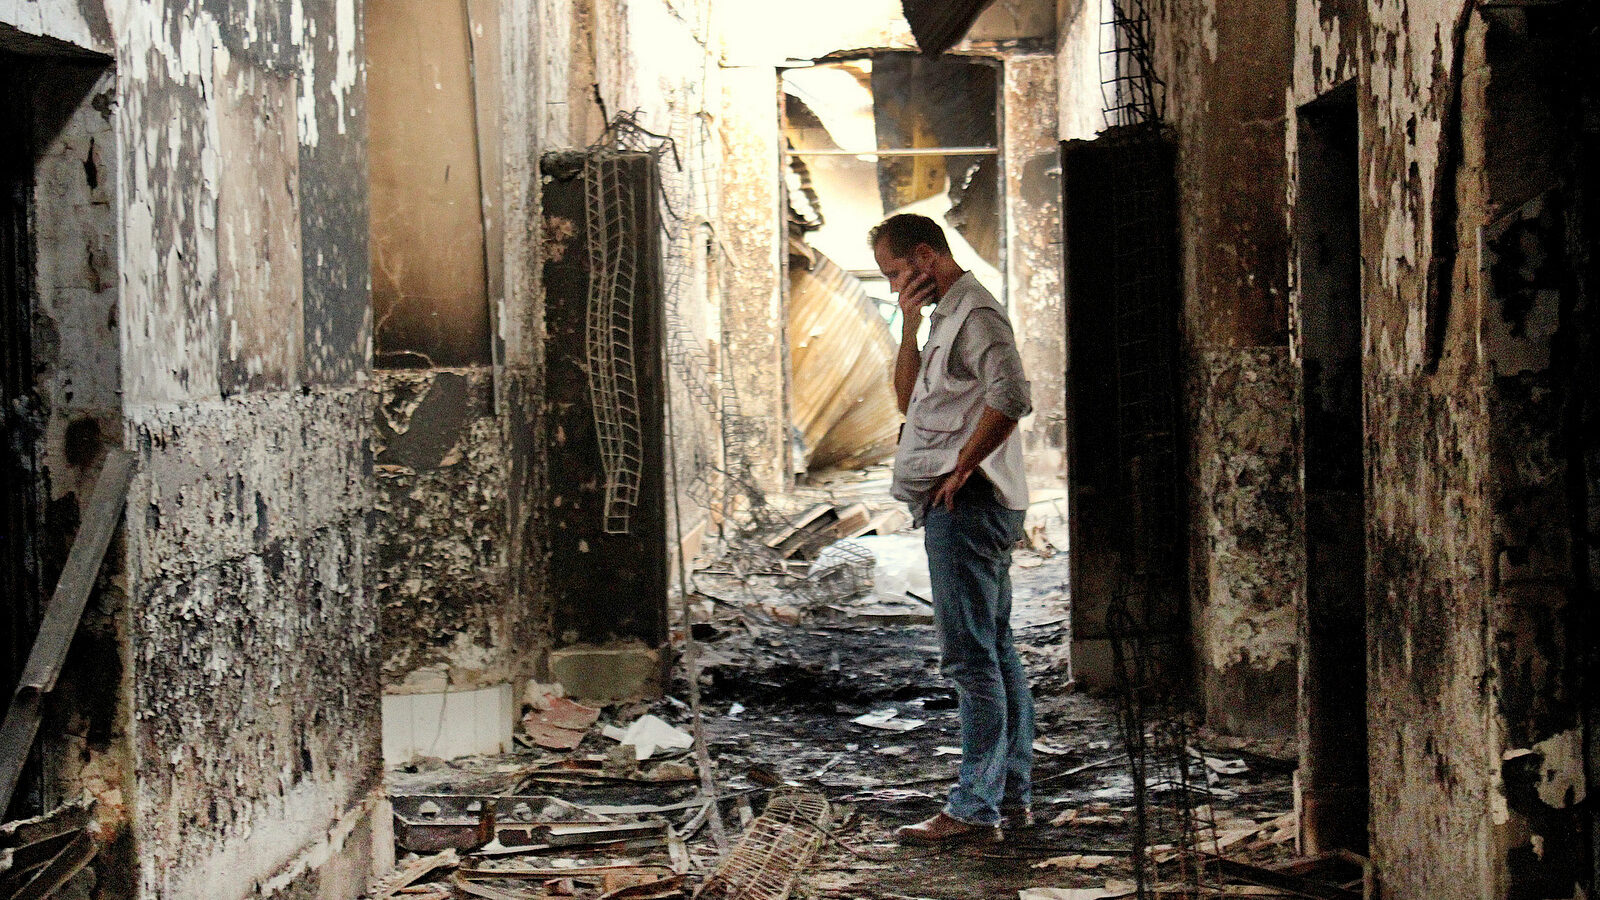 An employee of Doctors Without Borders, MSF, walks inside the charred remains of the organization's hospital after it was hit by a U.S. airstrike in Kunduz, Afghanistan. (AP/Najim Rahim)